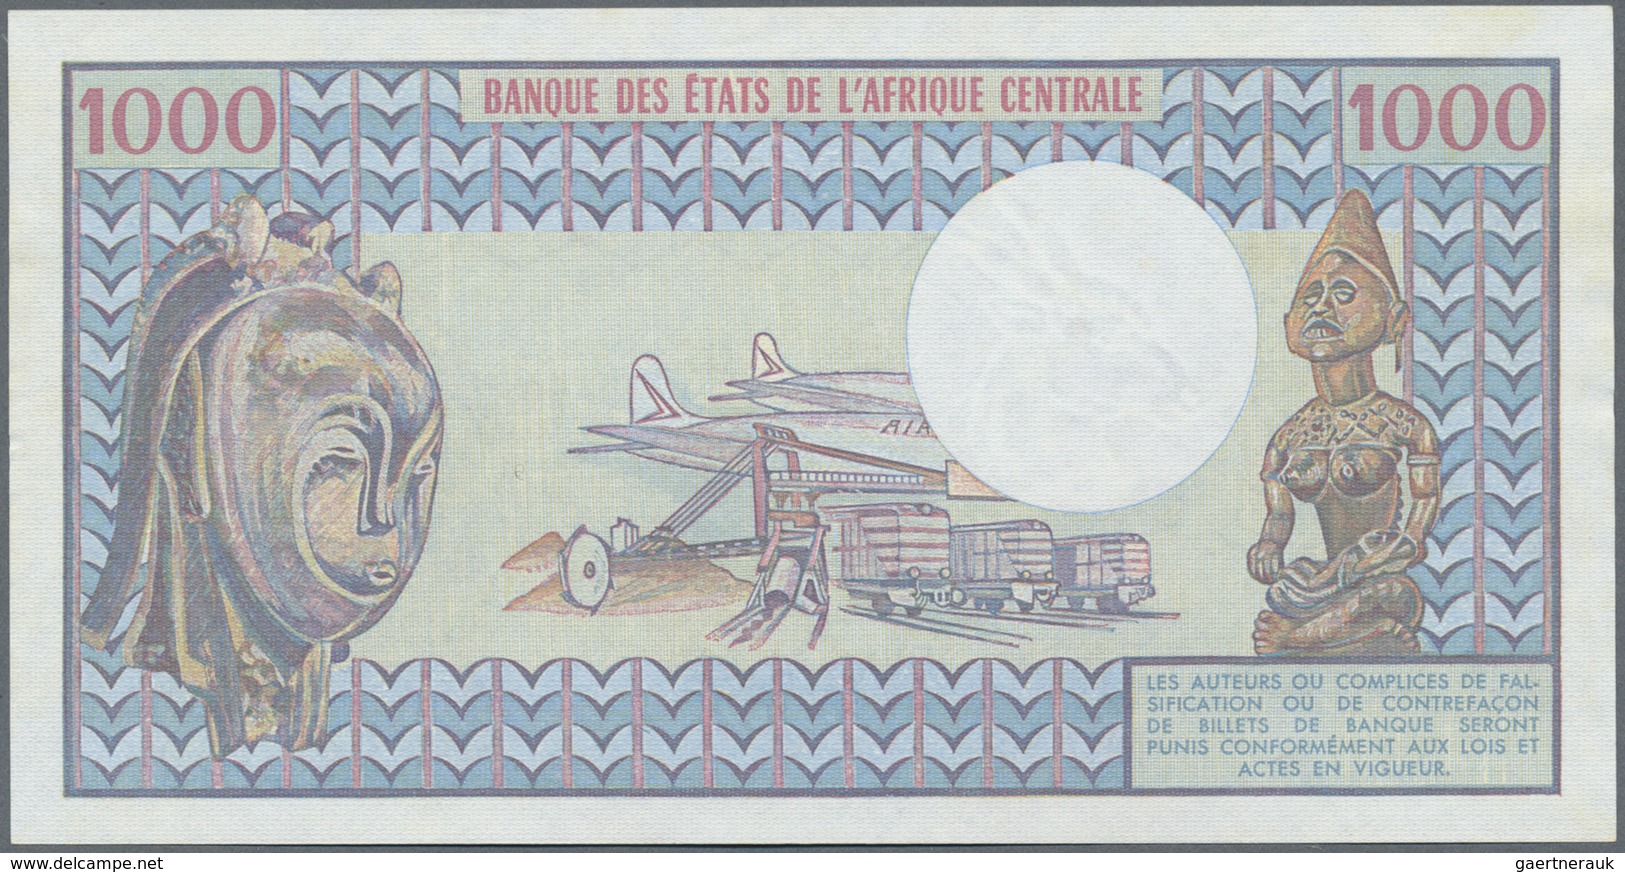 Chad / Tschad: 1000 Francs ND P. 3b, In Condition: AUNC. - Chad